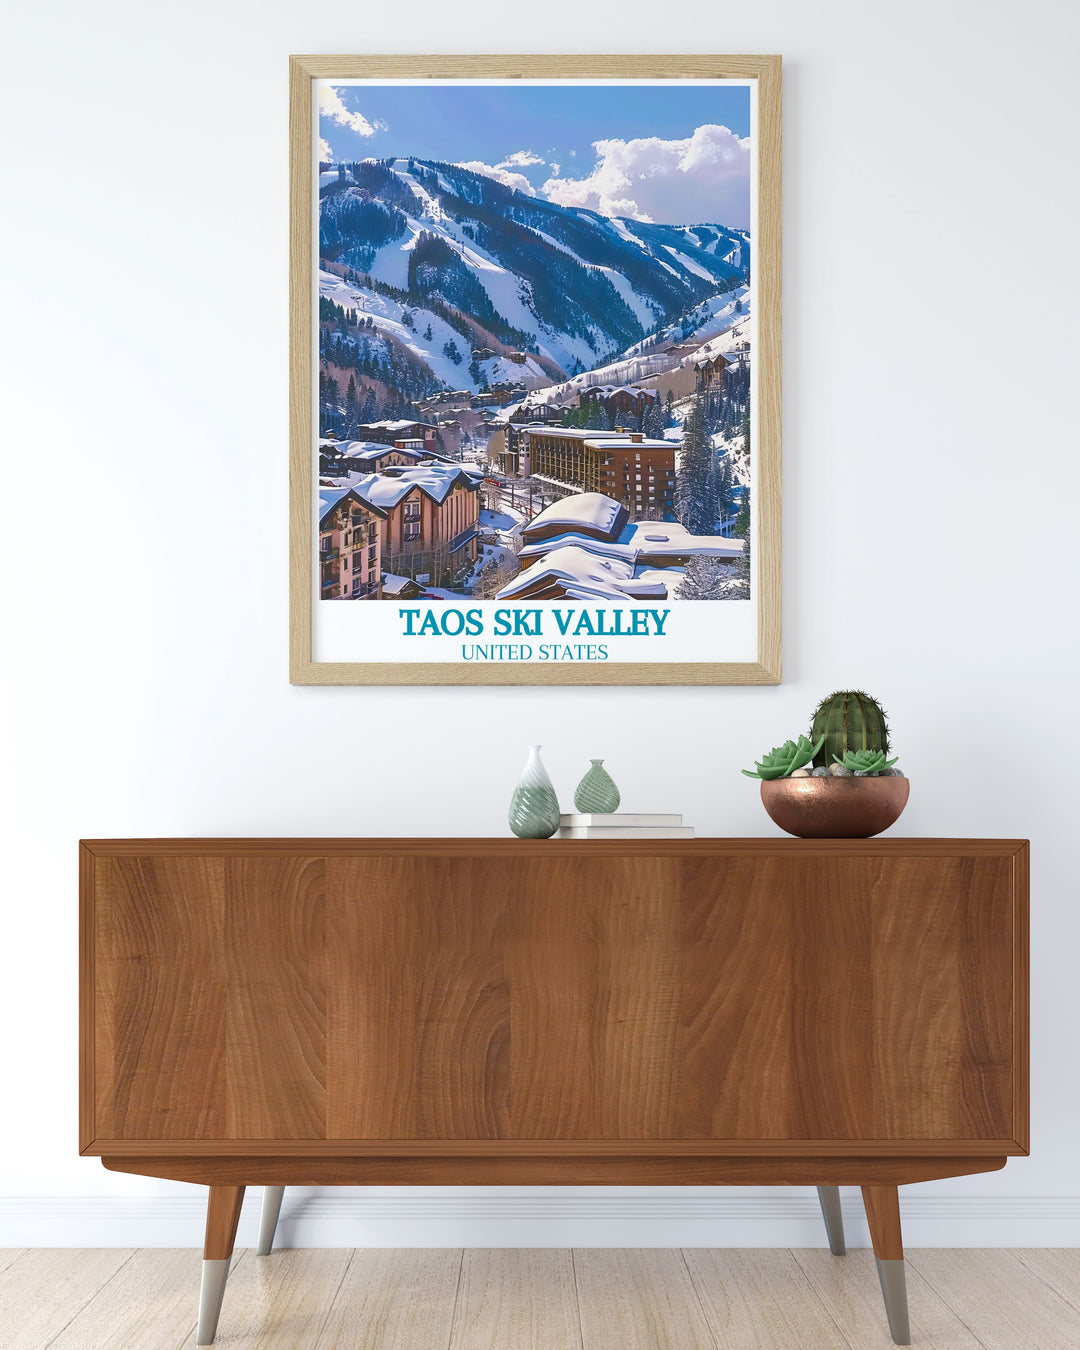 Immerse yourself in the lively spirit of Taos with this travel poster, highlighting the resort center and its surrounding alpine beauty.